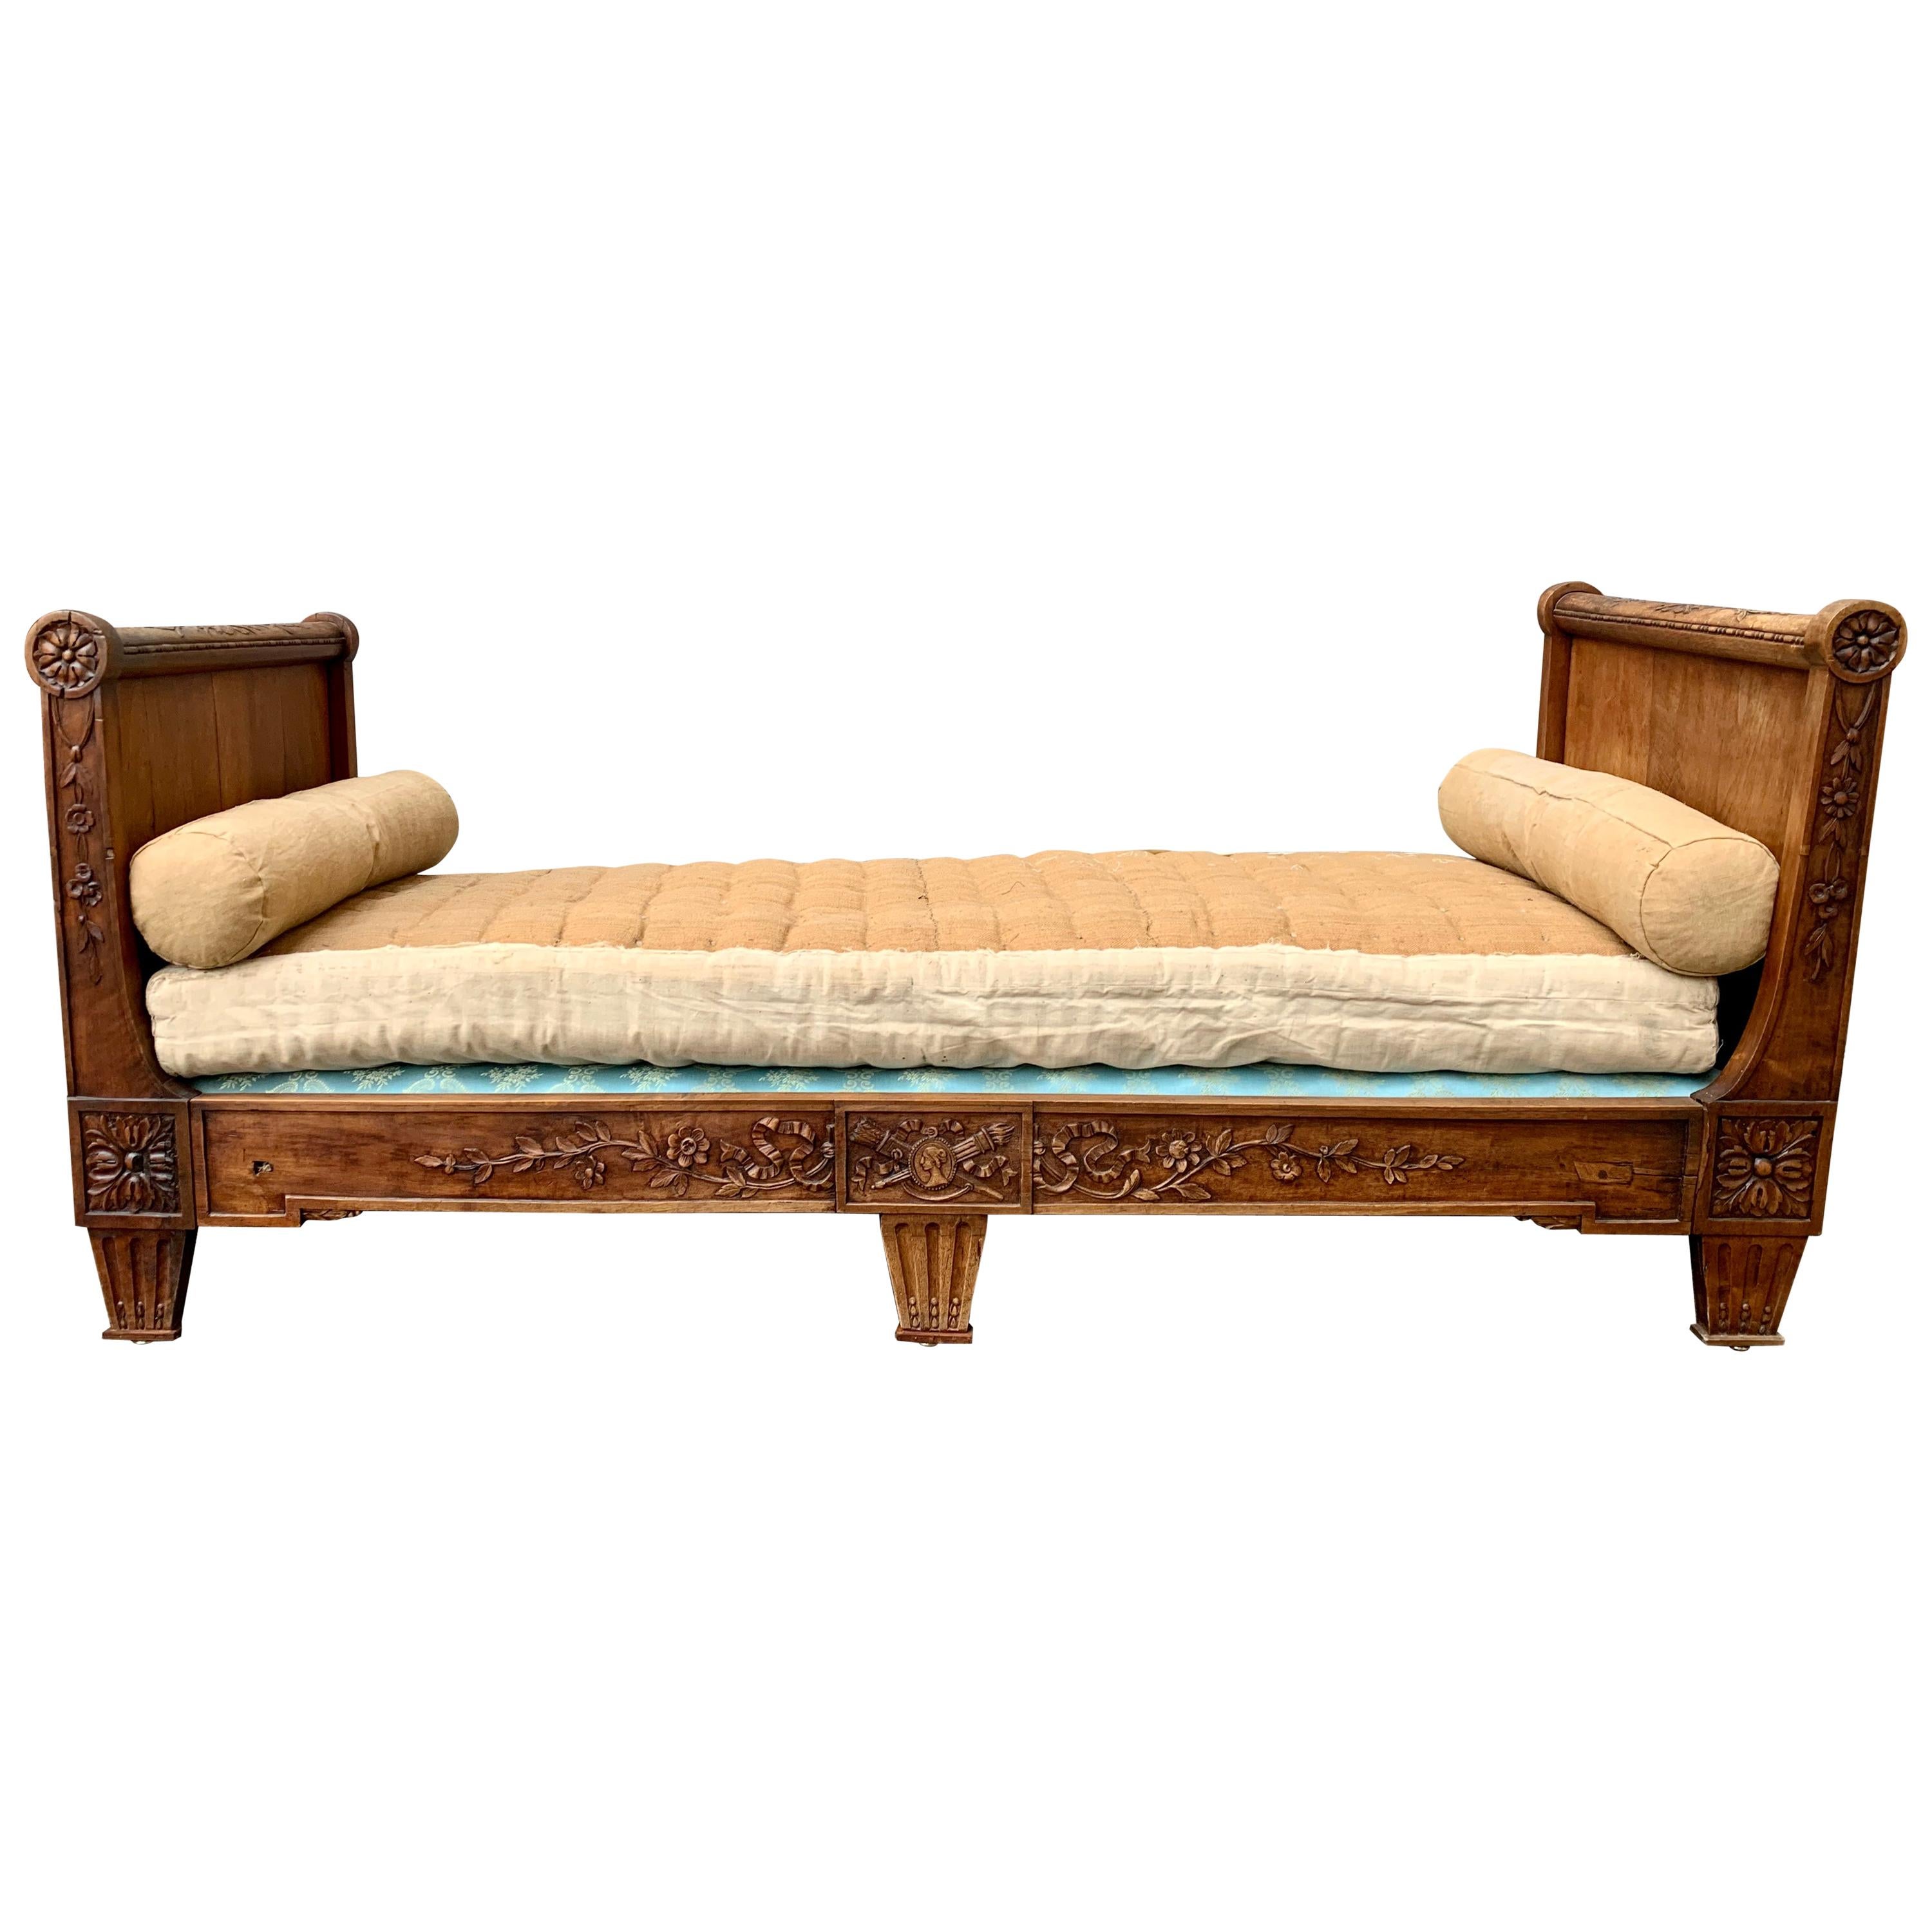 Small French Louis XVI Daybed Settee In Carved Mahogany